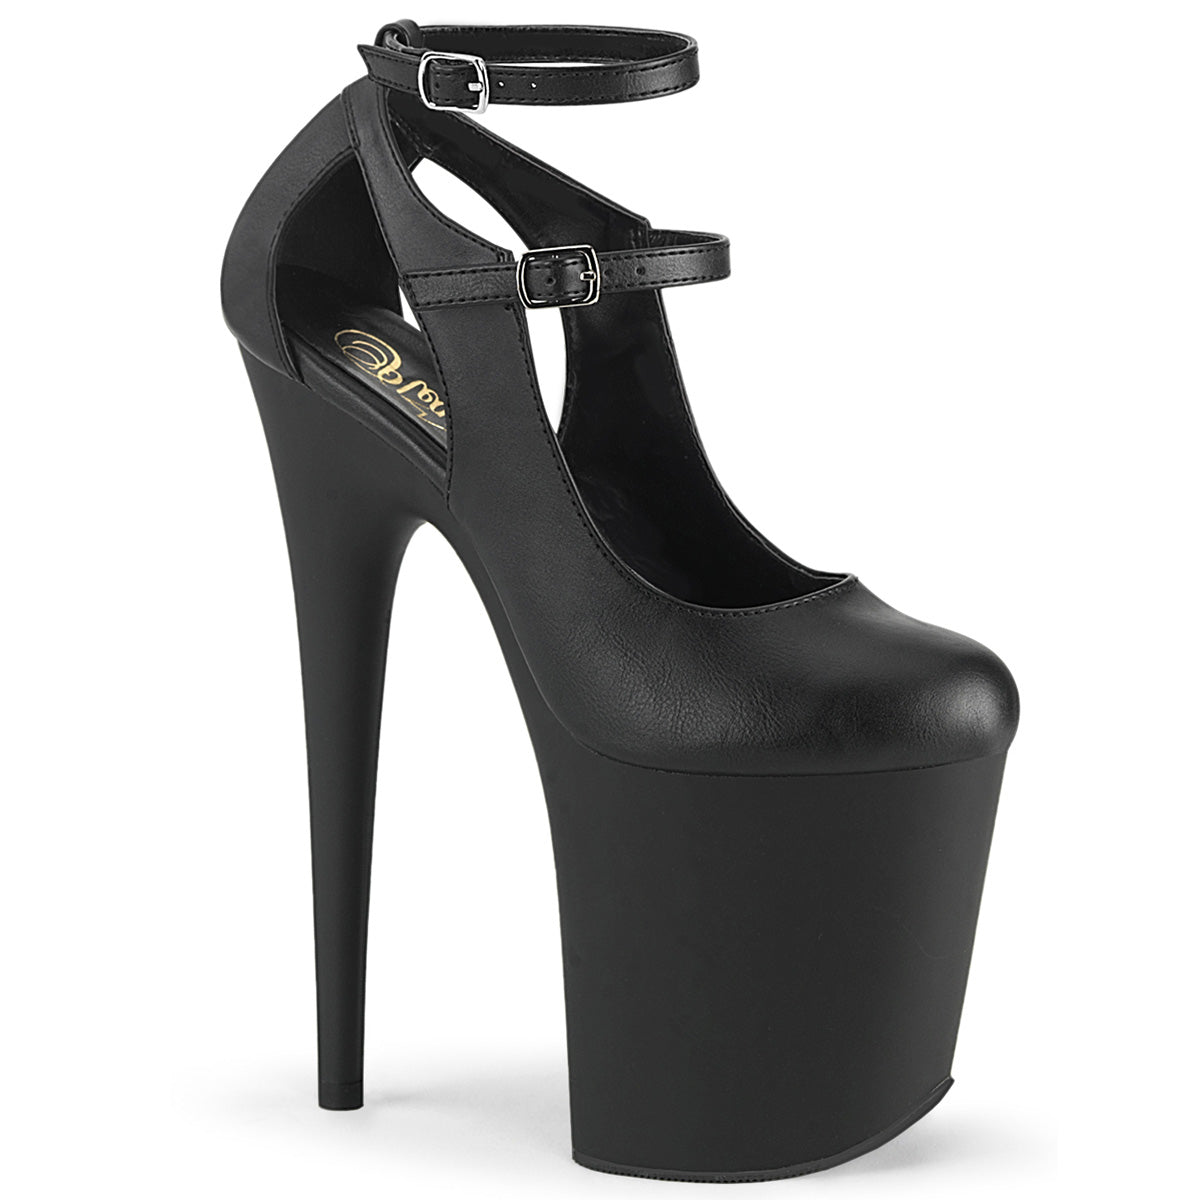 Pleaser FLAMINGO-850 Black Faux Leather 8 Inch (200mm) Heel, 4 Inch (100mm) Platform Cutout Mary Jane Pump Featuring Dual Buckle Ankle Straps